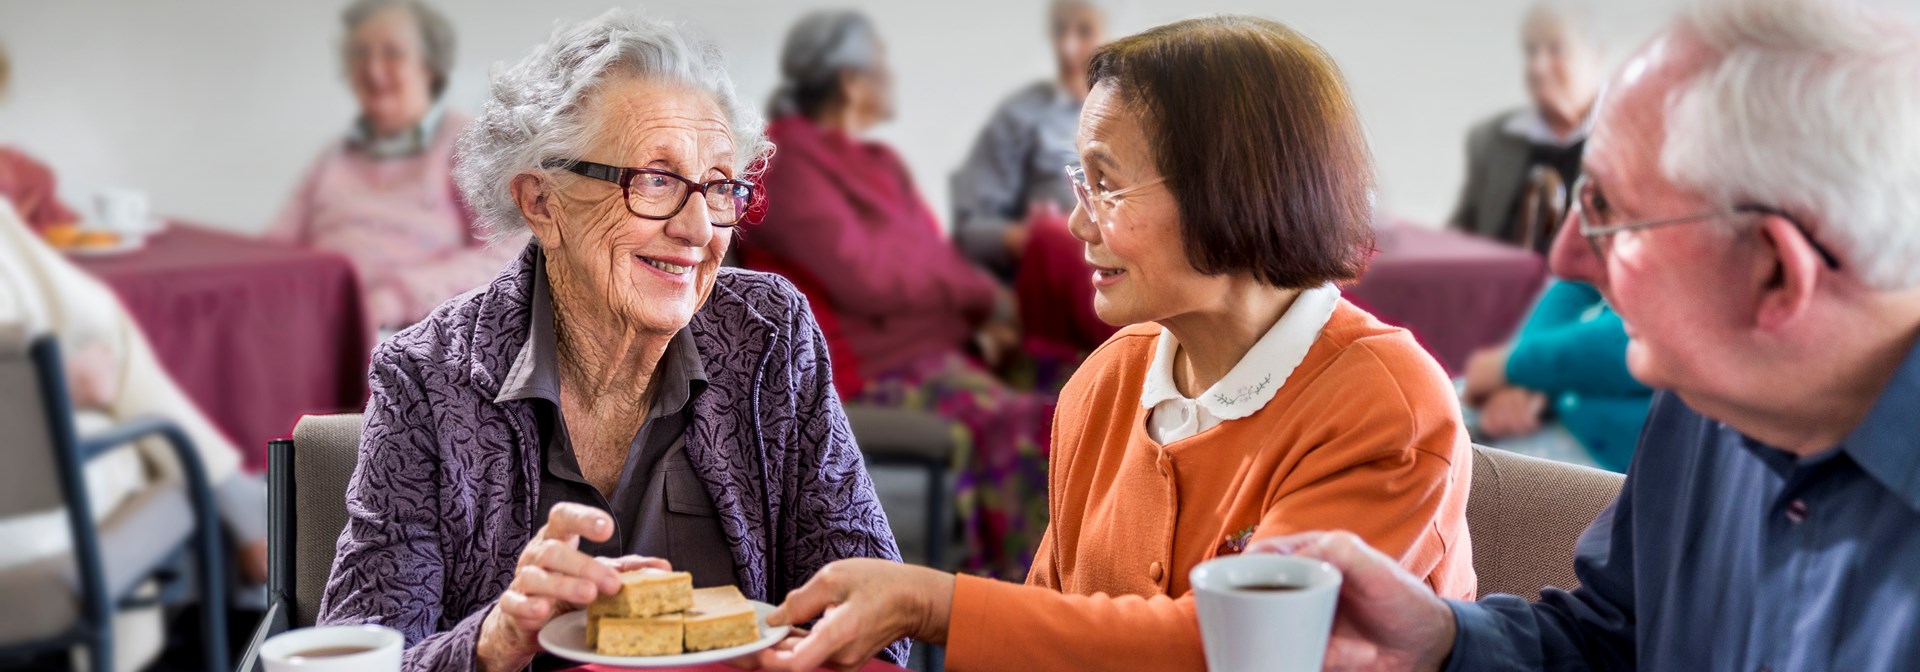 The Selwyn Foundations charitable outreach supports elders who are socially isolated or lonely